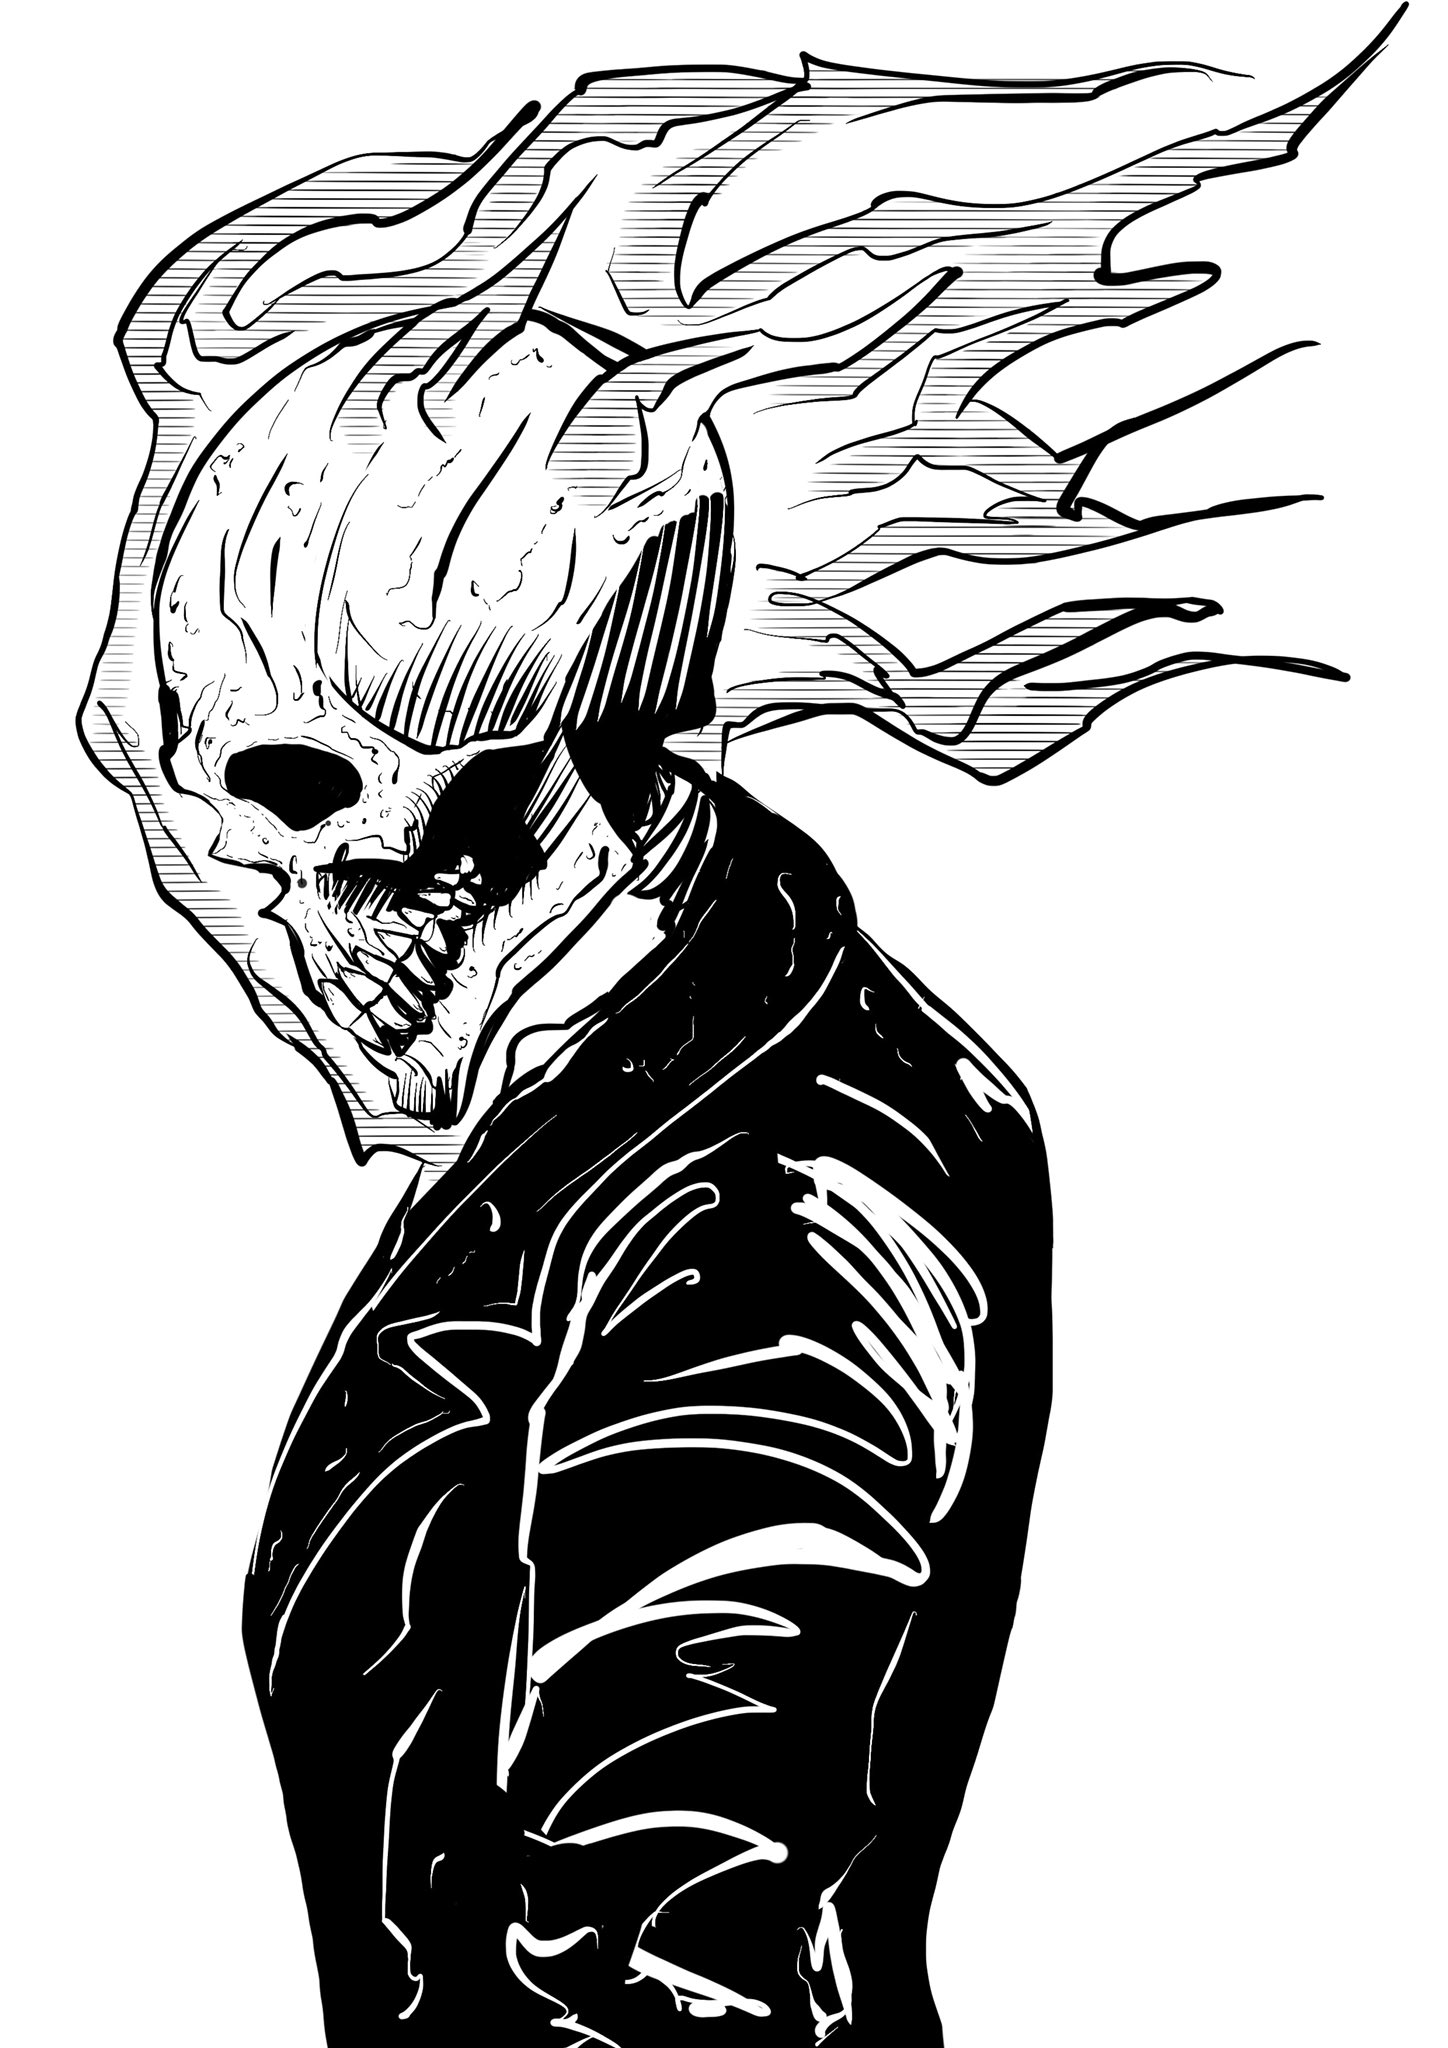 How to draw GHOST RIDER HEAD - YouTube